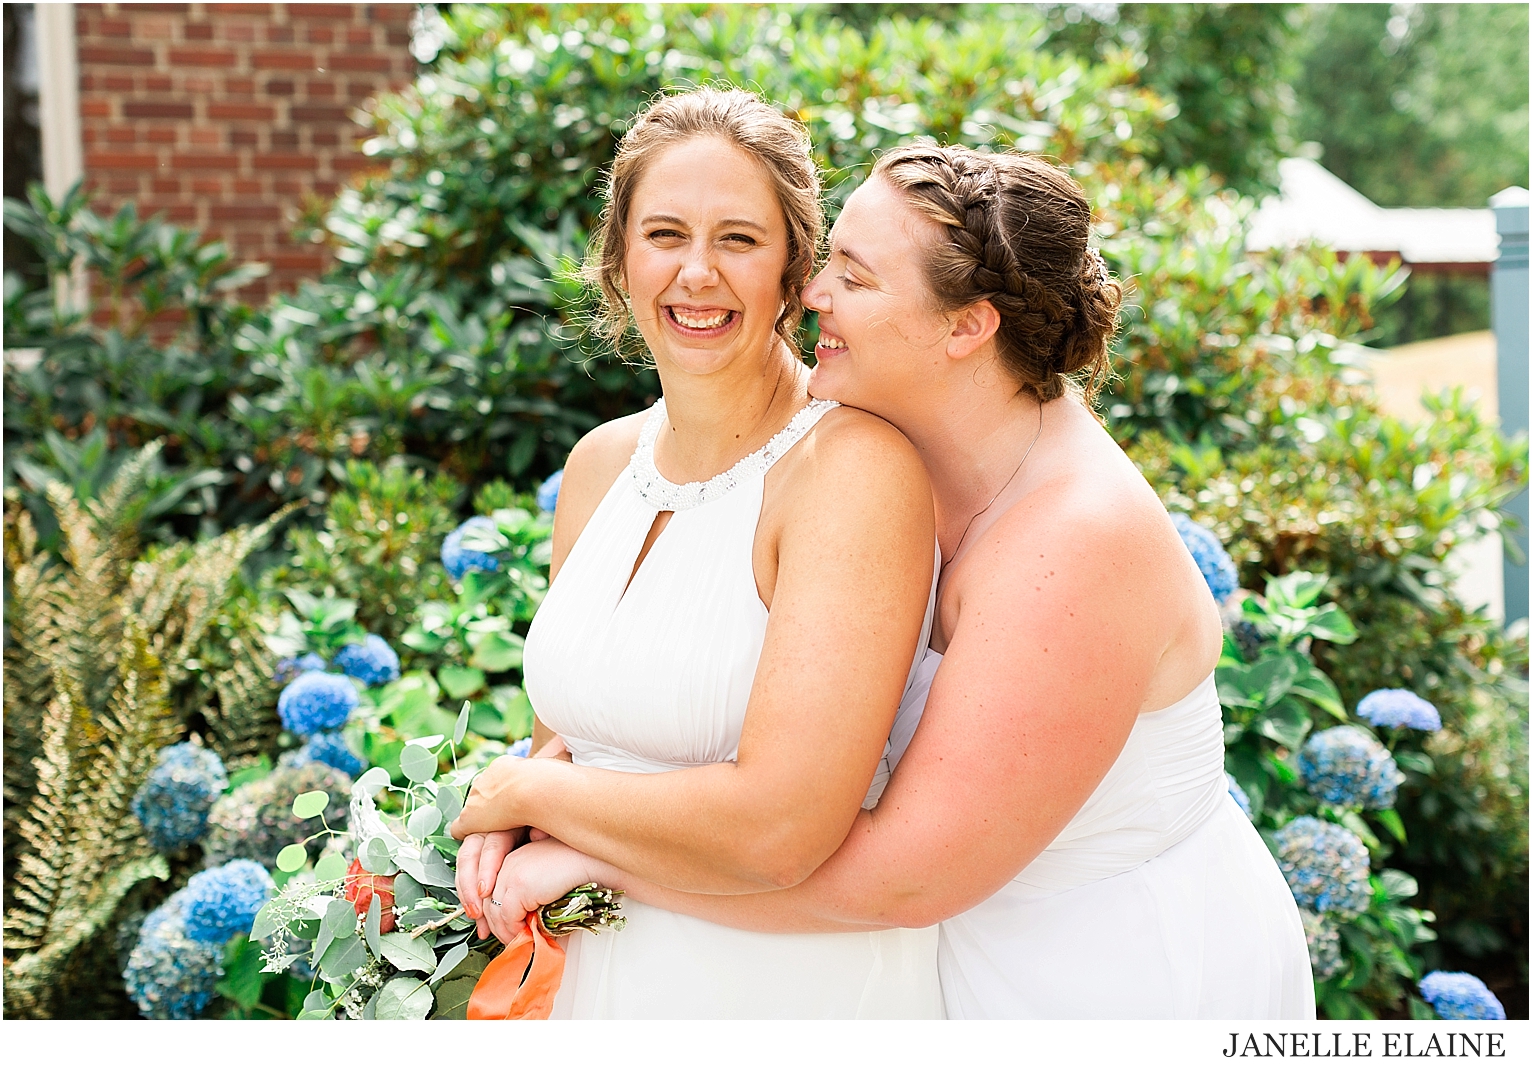 liz and christina lanning-first look and portraits-luther burbank park-janelle elaine photography-187.jpg